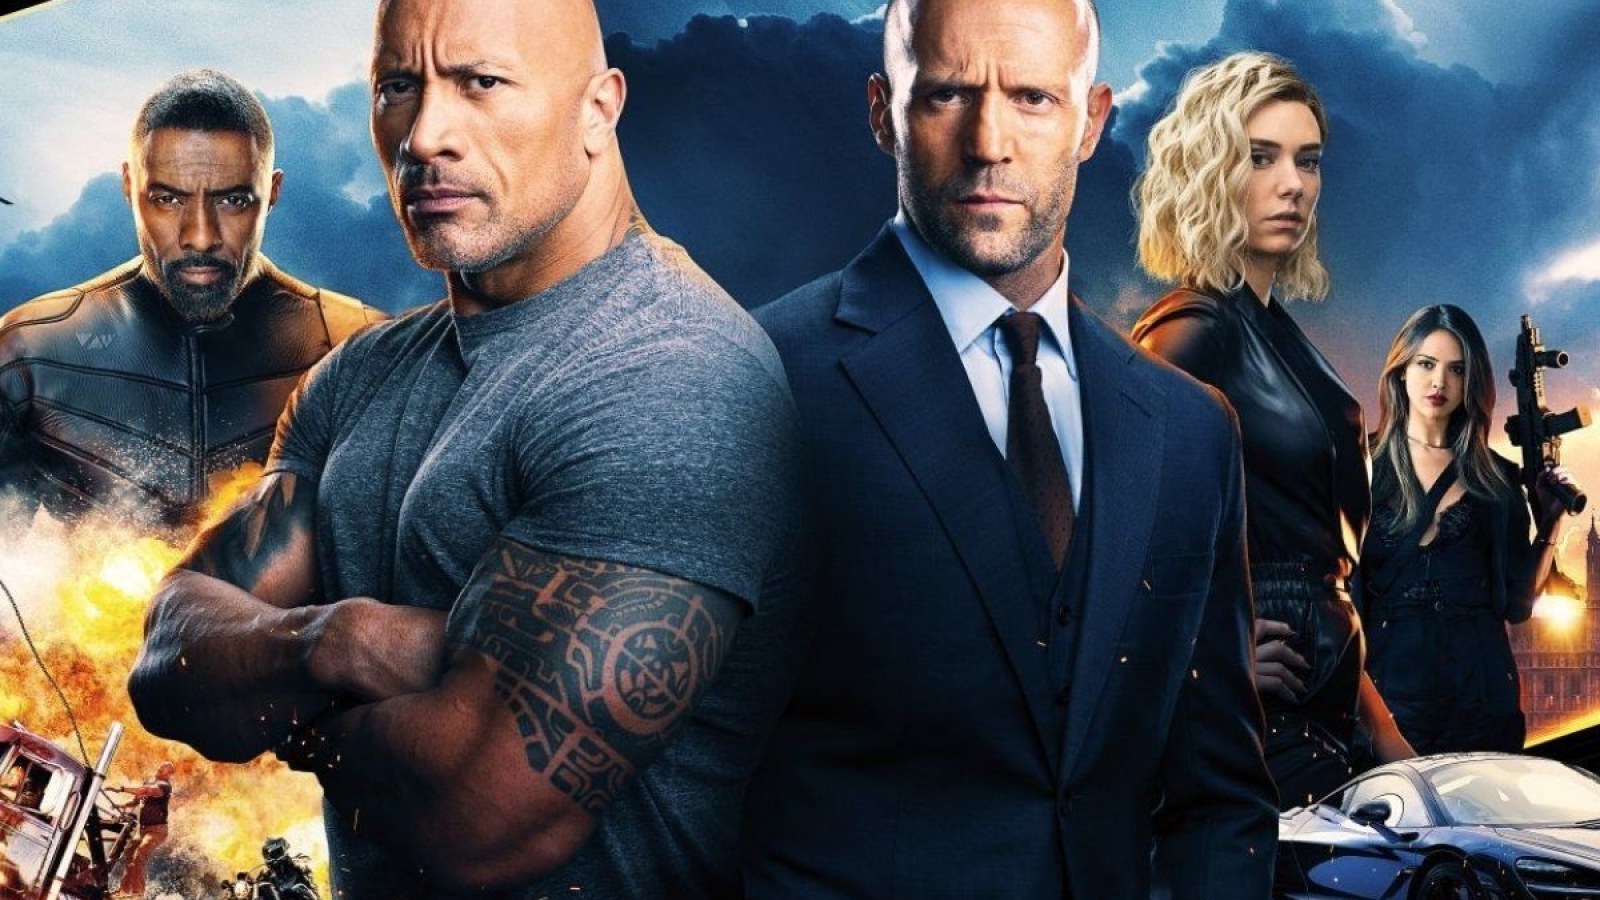 Will There Be a 'Hobbs and Shaw 2' After 'Fast and Furious 9'?